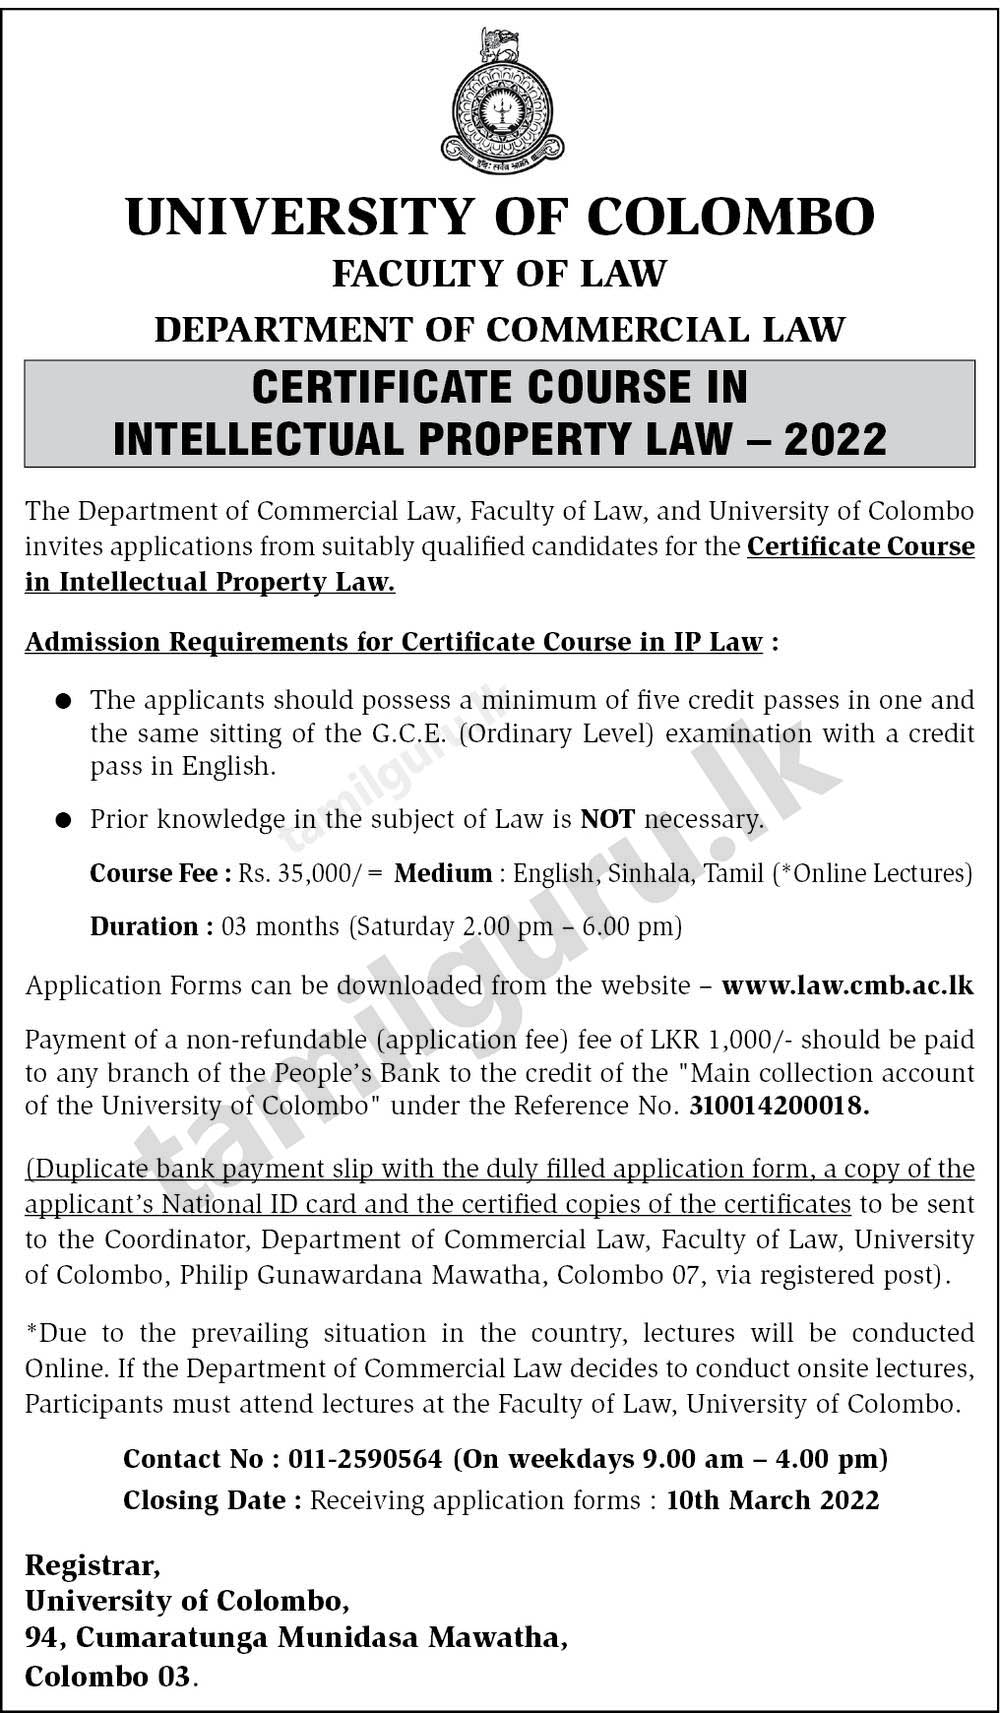 Certificate Course in Intellectual Property Law (CIPL) 2022 - University of Colombo - Notice in English